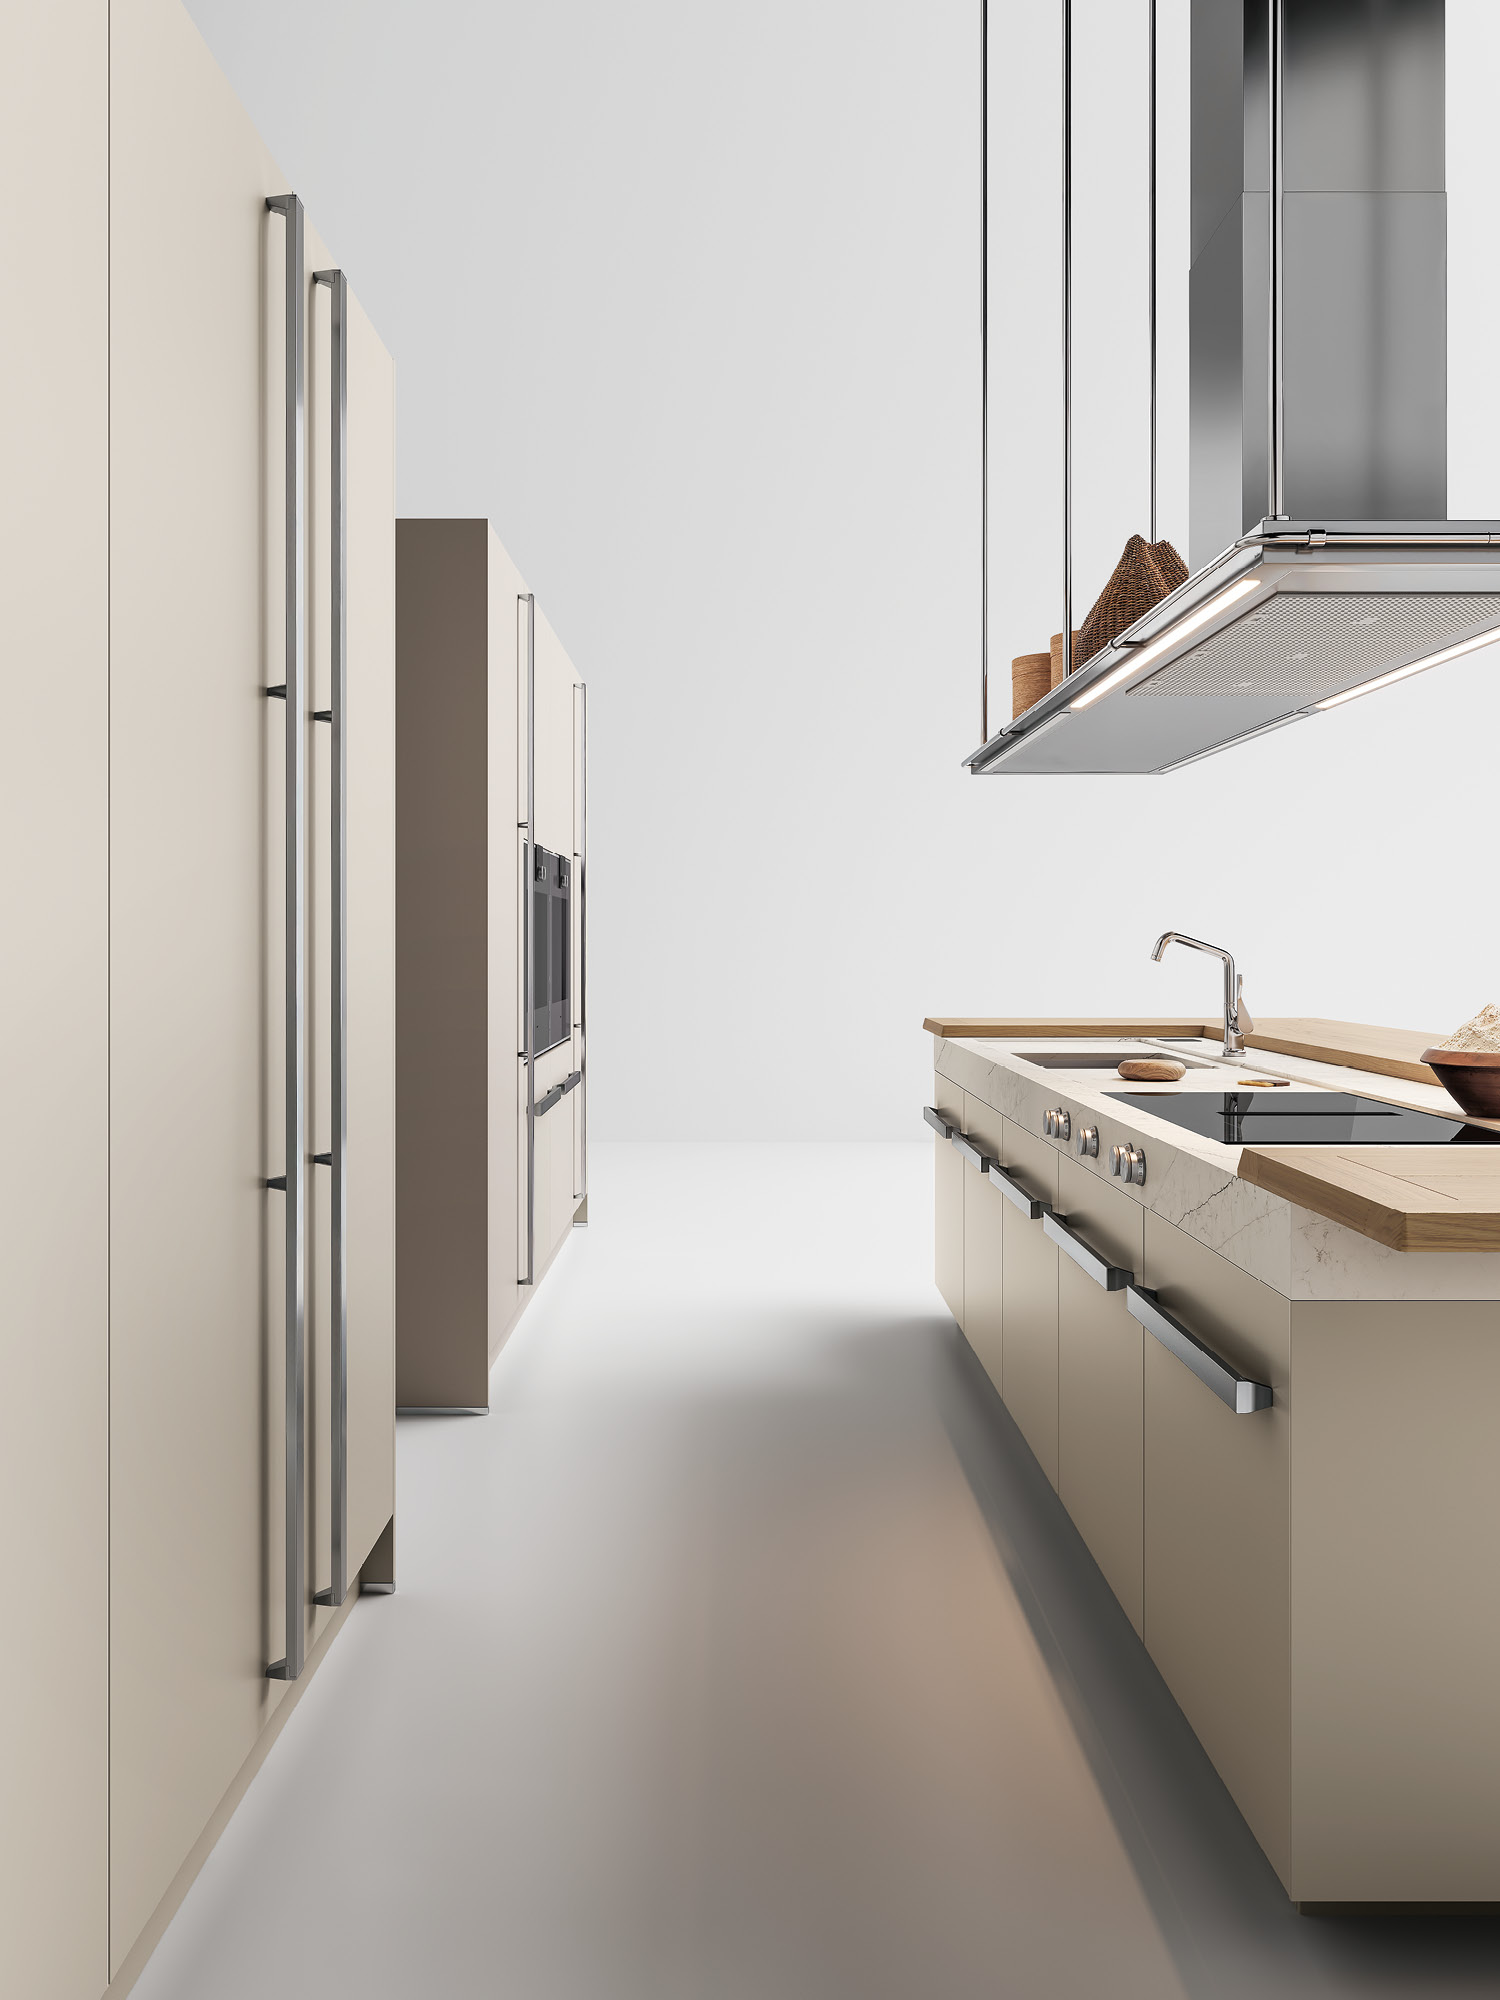 Proxima kitchen Arclinea lacquered doors side view